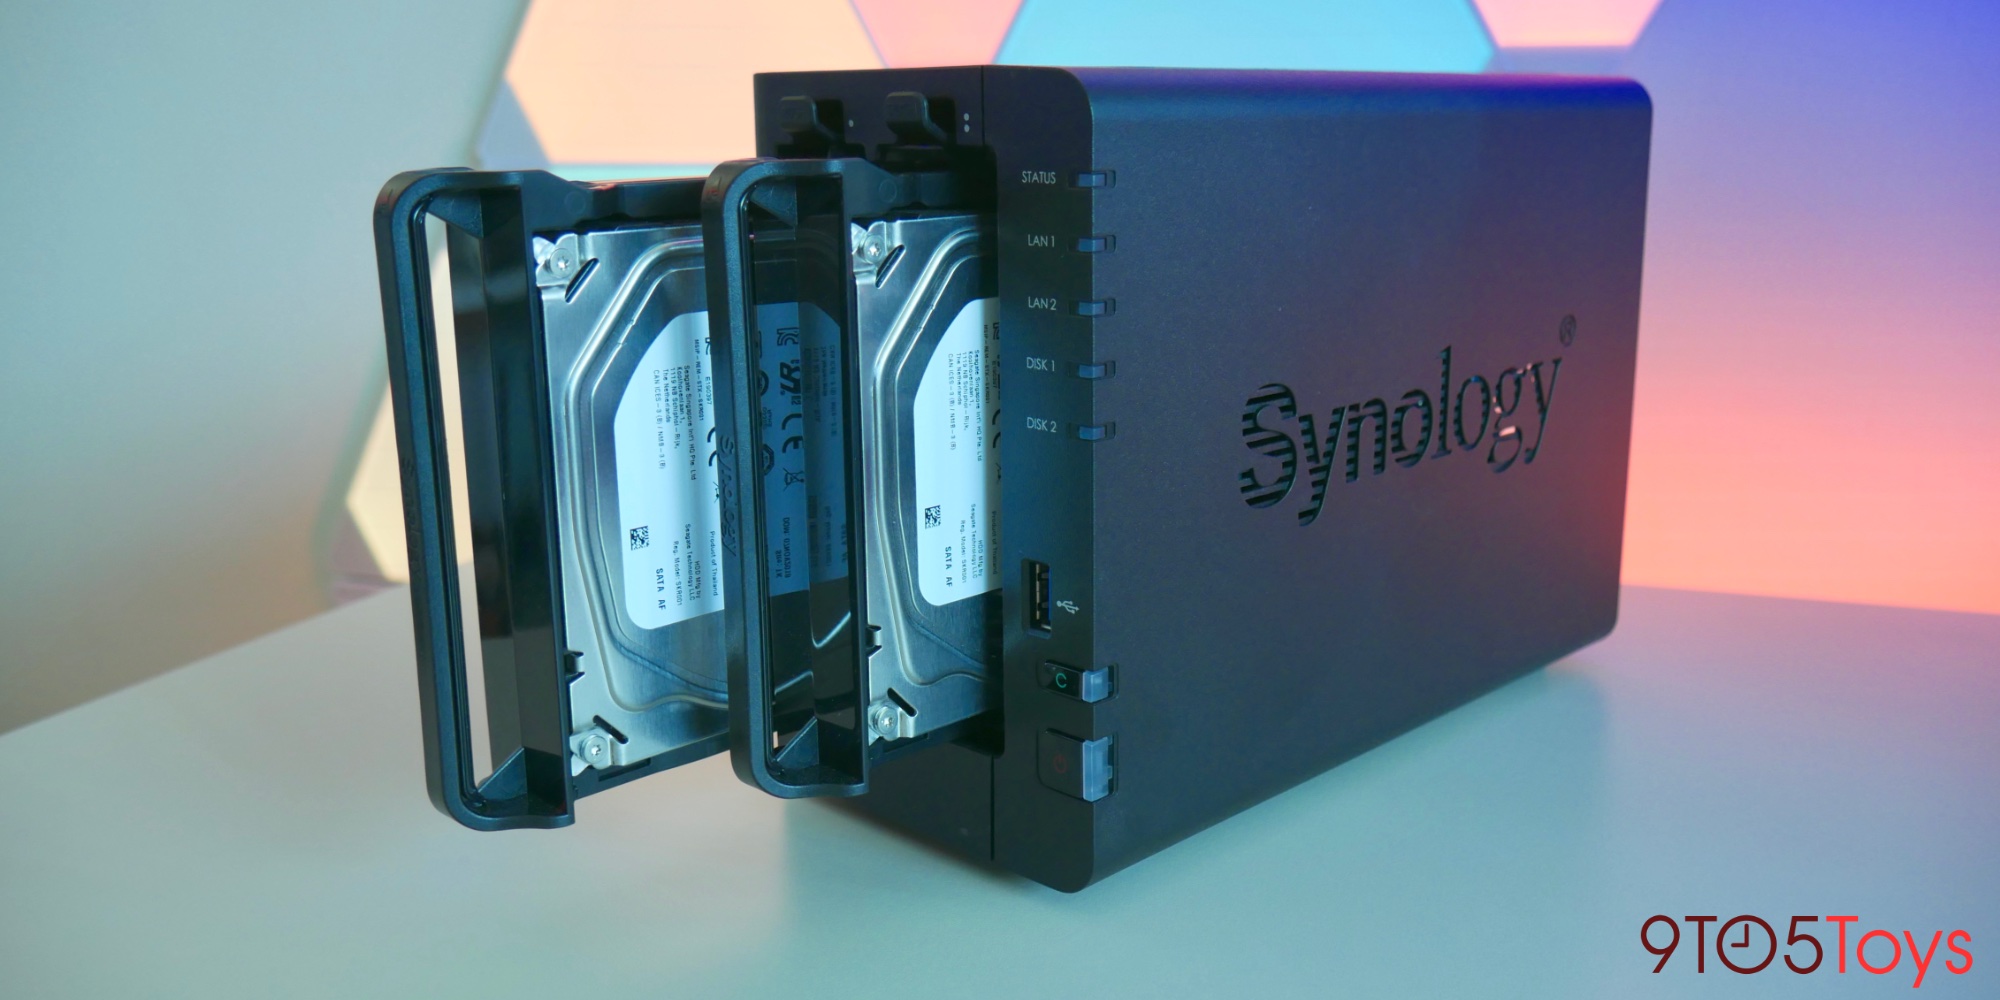 Synology DS220+ NAS debuts with dual networking, more - 9to5Toys